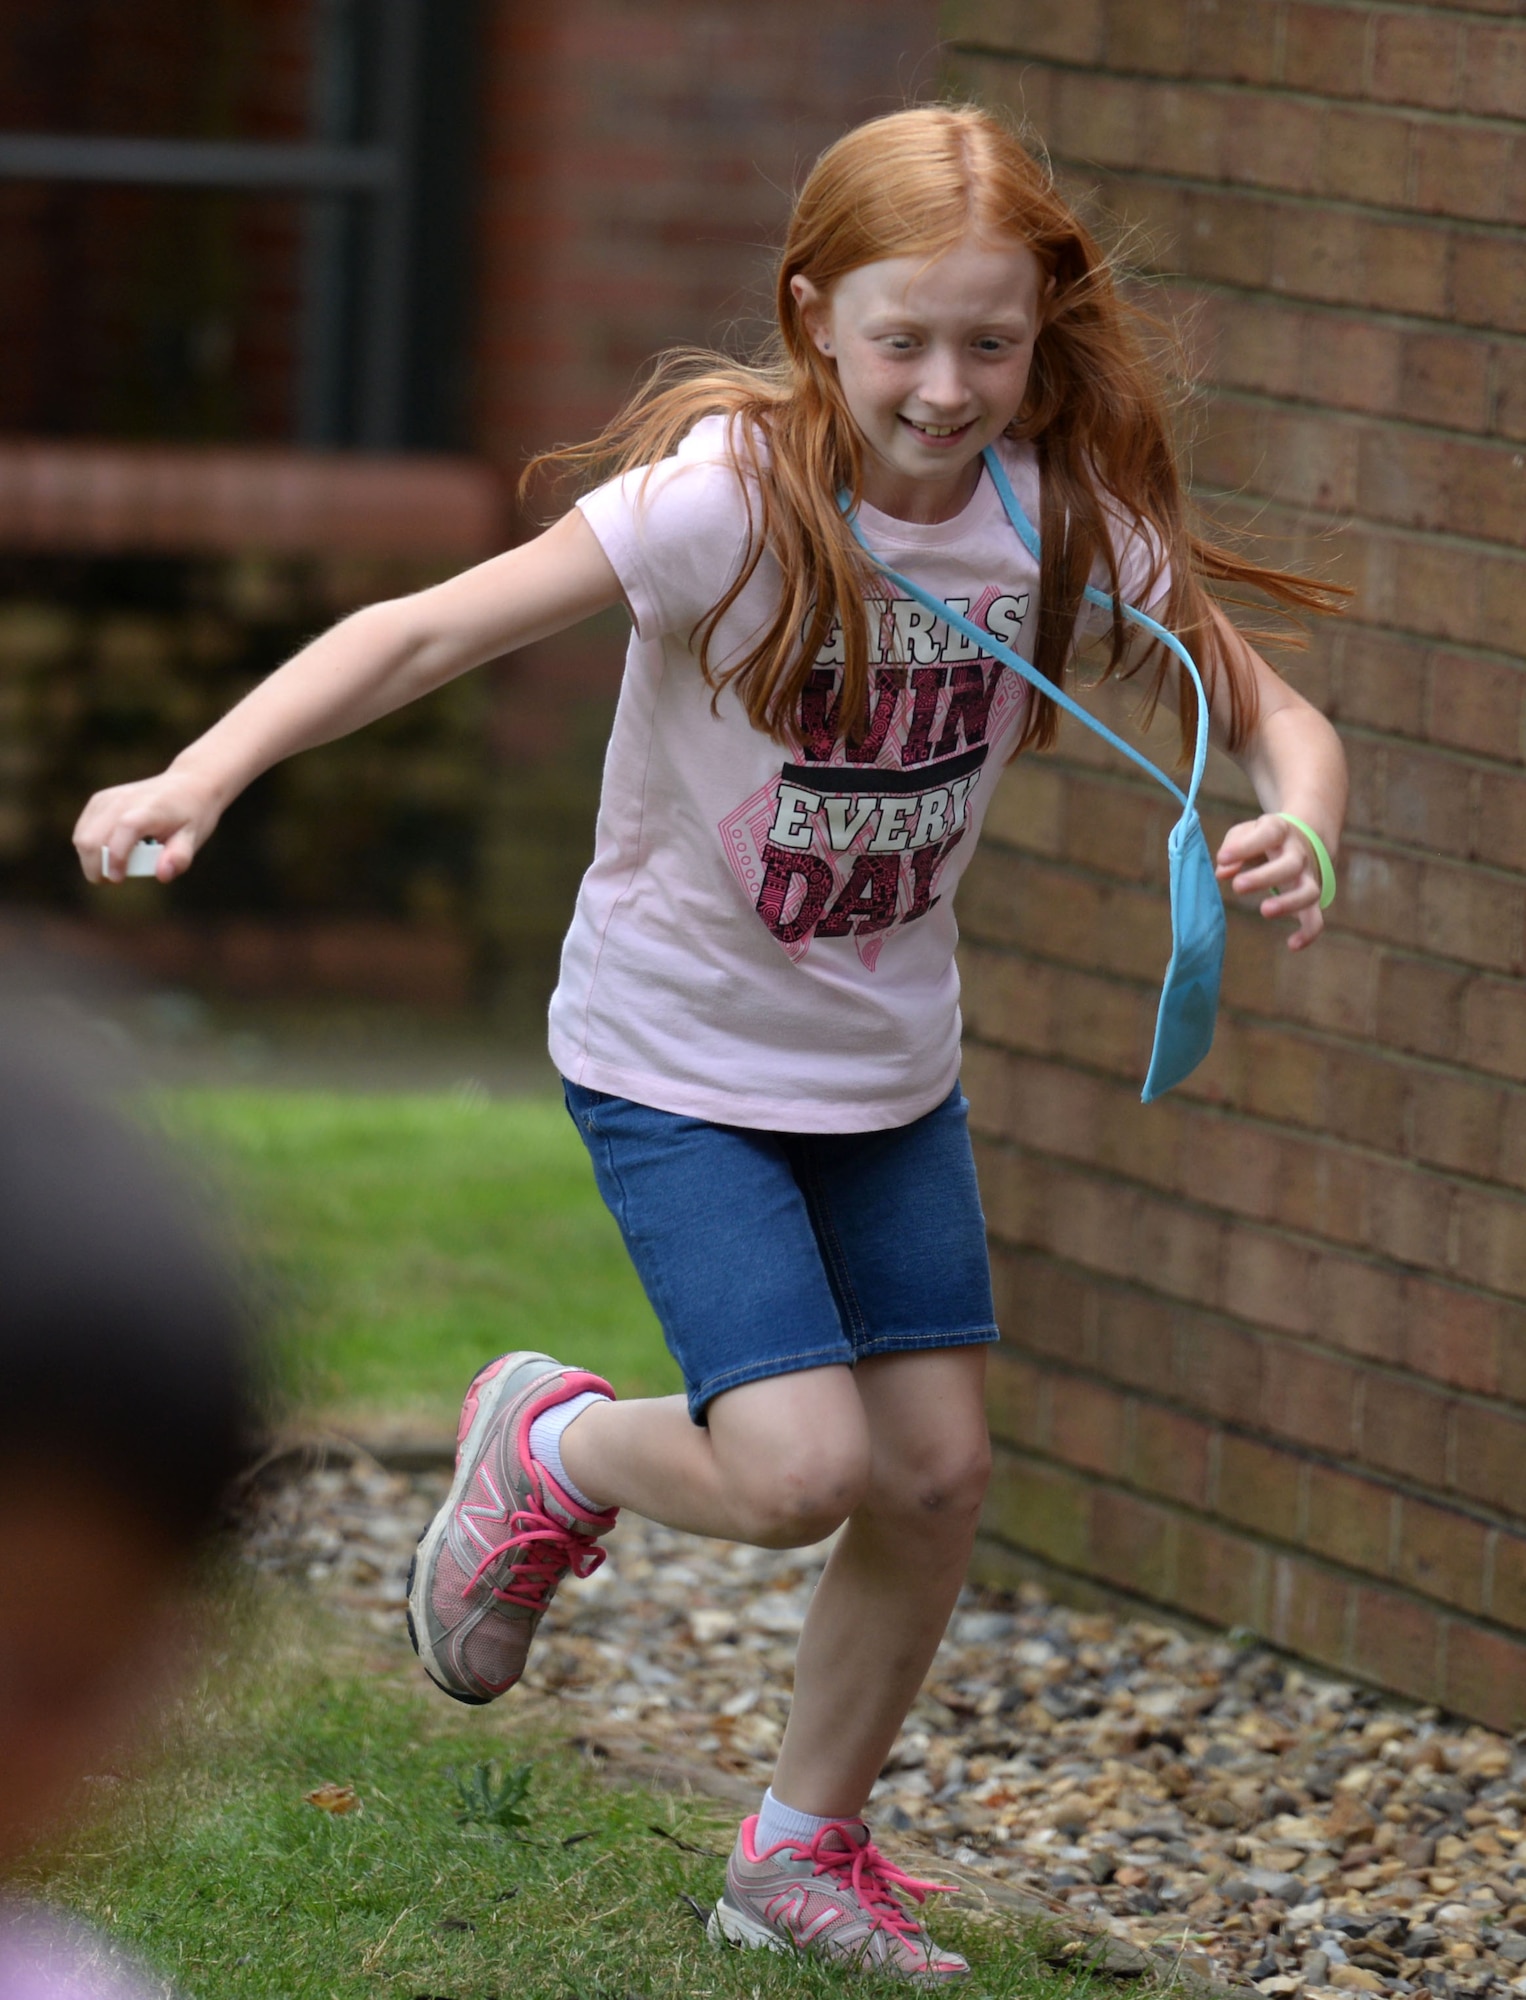 Team Mildenhall children take part in outdoor games during Vacation Bible School July 25, 2016, outside the chapel on RAF Mildenhall, England. This annual event is open to all military members and their families from RAF Mildenhall or RAF Lakenheath. (U.S. Air Force photo by Gina Randall)